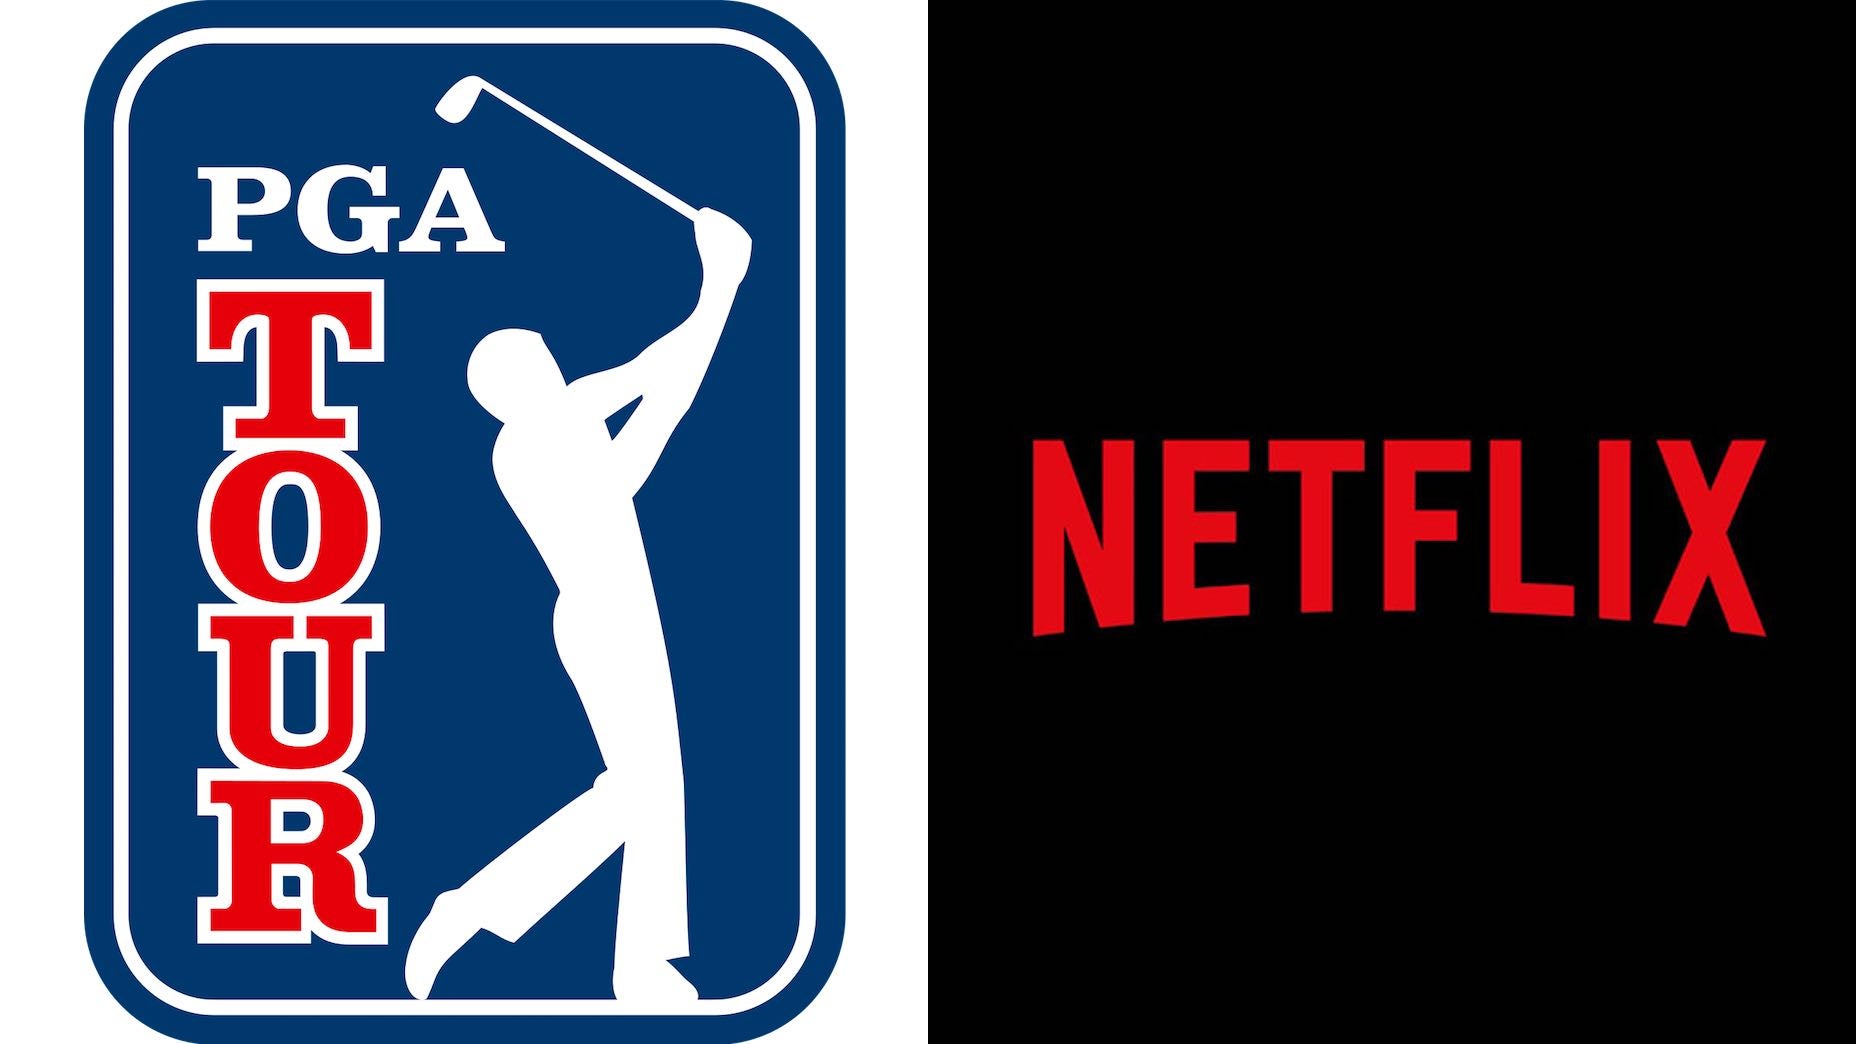 Netflix to launch PGA Tour docuseries offering inside look at life on Tour